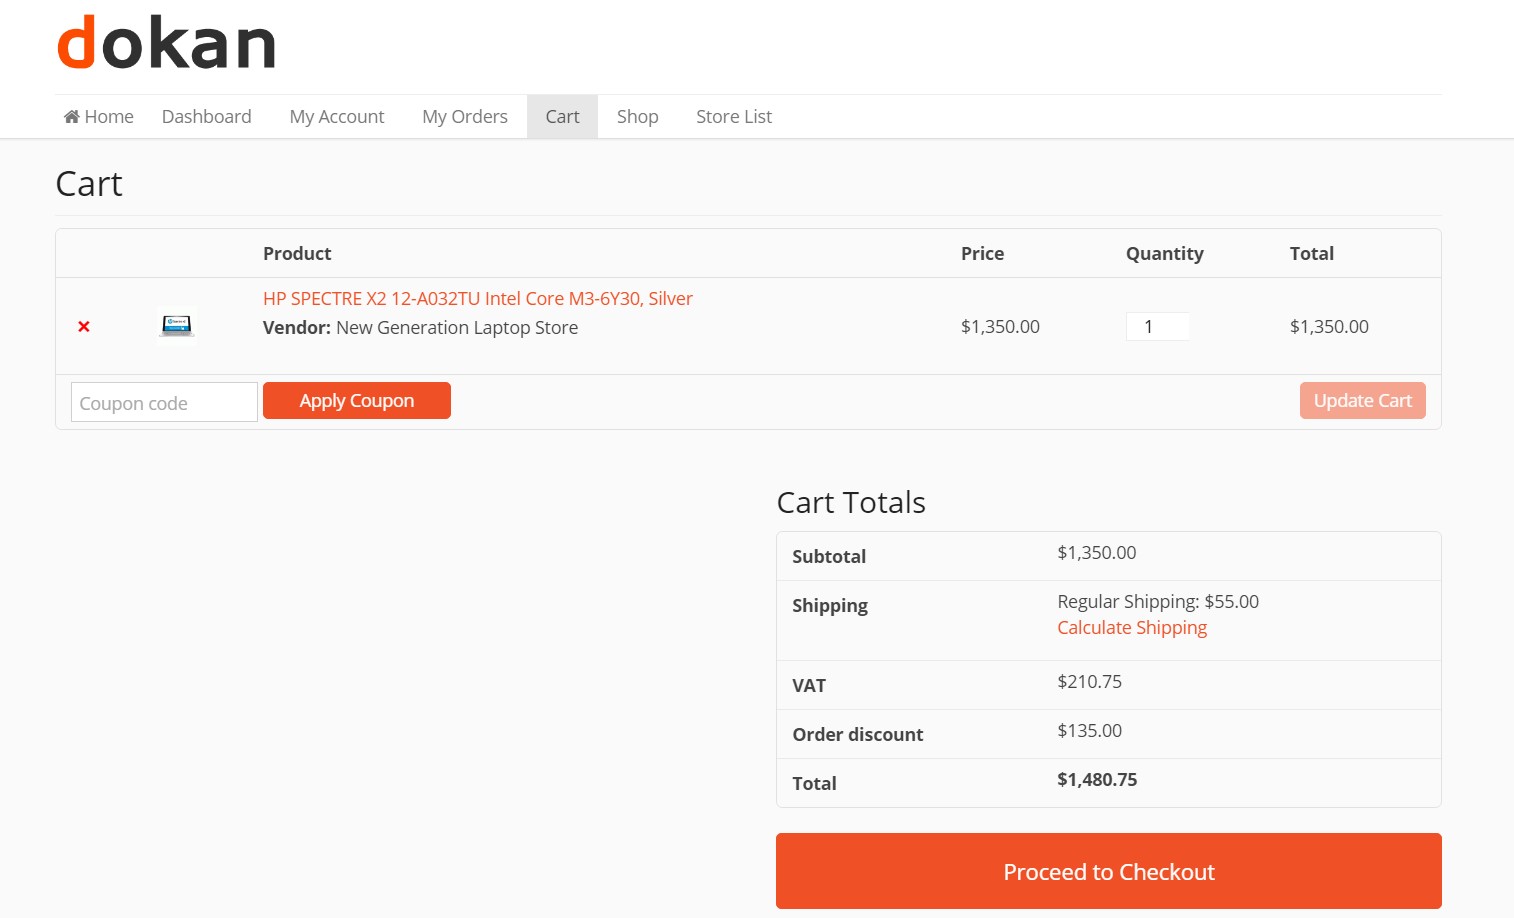 This is a screenshot of cart details